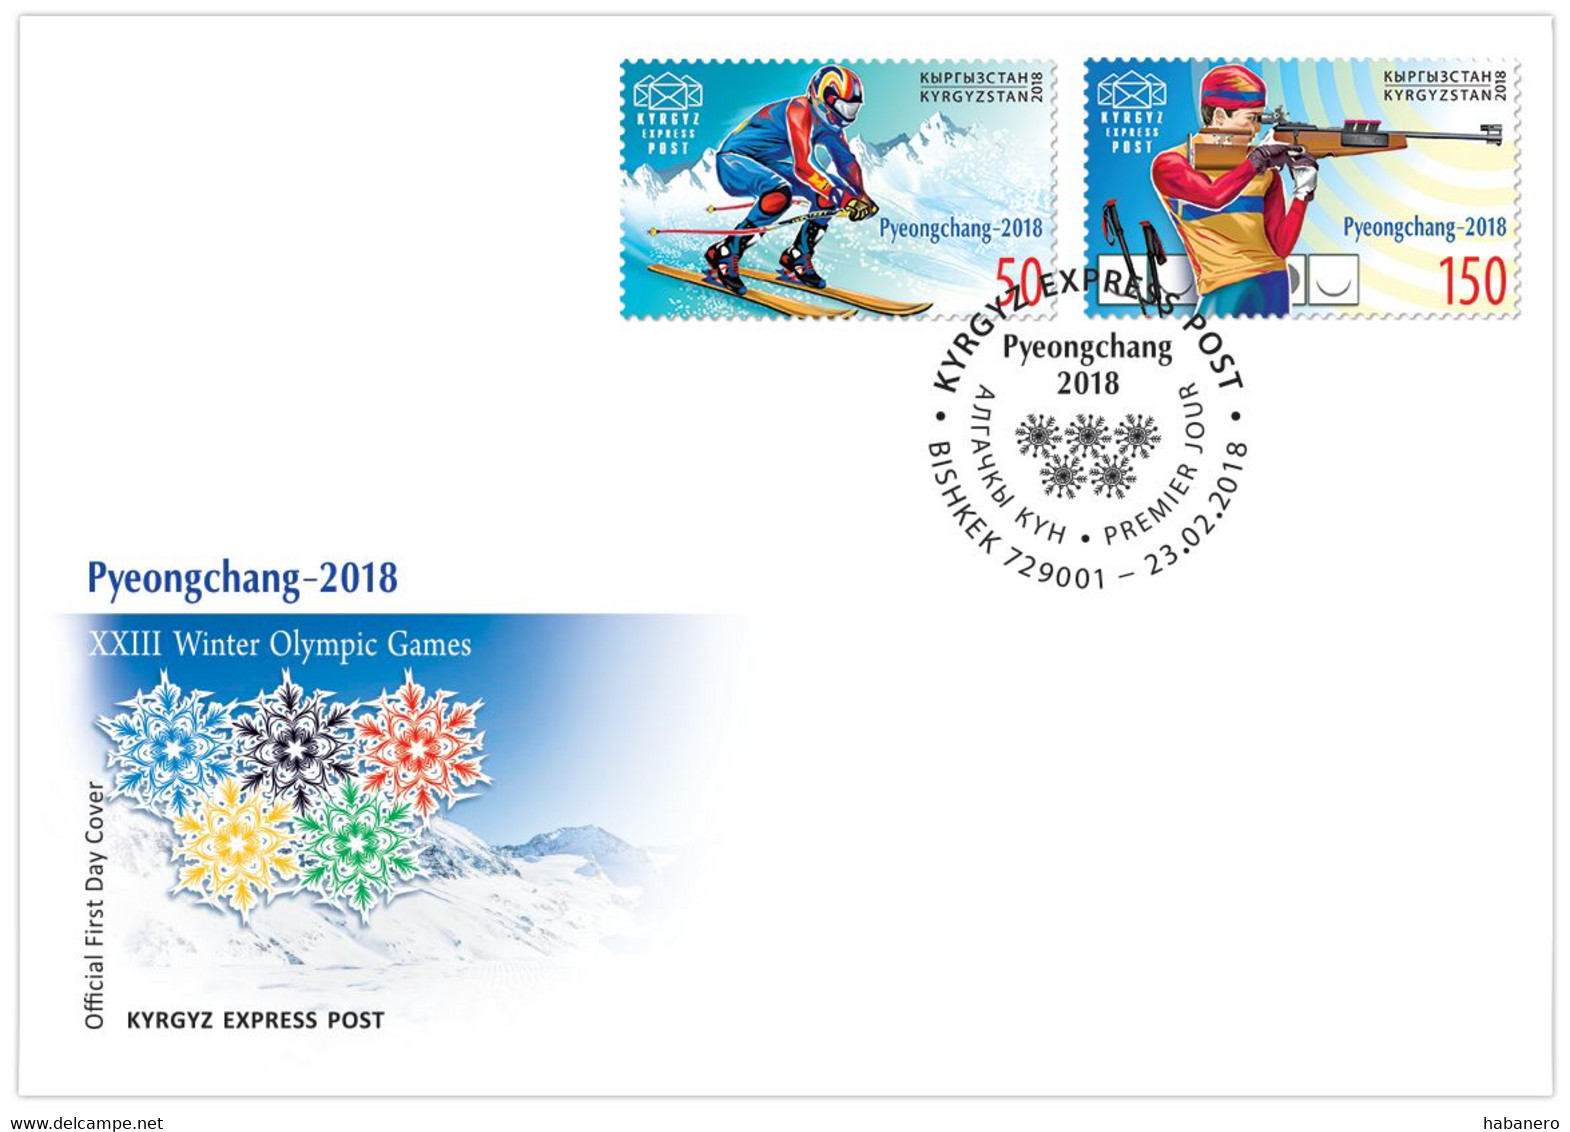 KYRGYZSTAN 2018 KEP 91-92 PYEONGCHANG OLYMPIC GAMES FDC - ONLY 400 ISSUED - Winter 2018: Pyeongchang